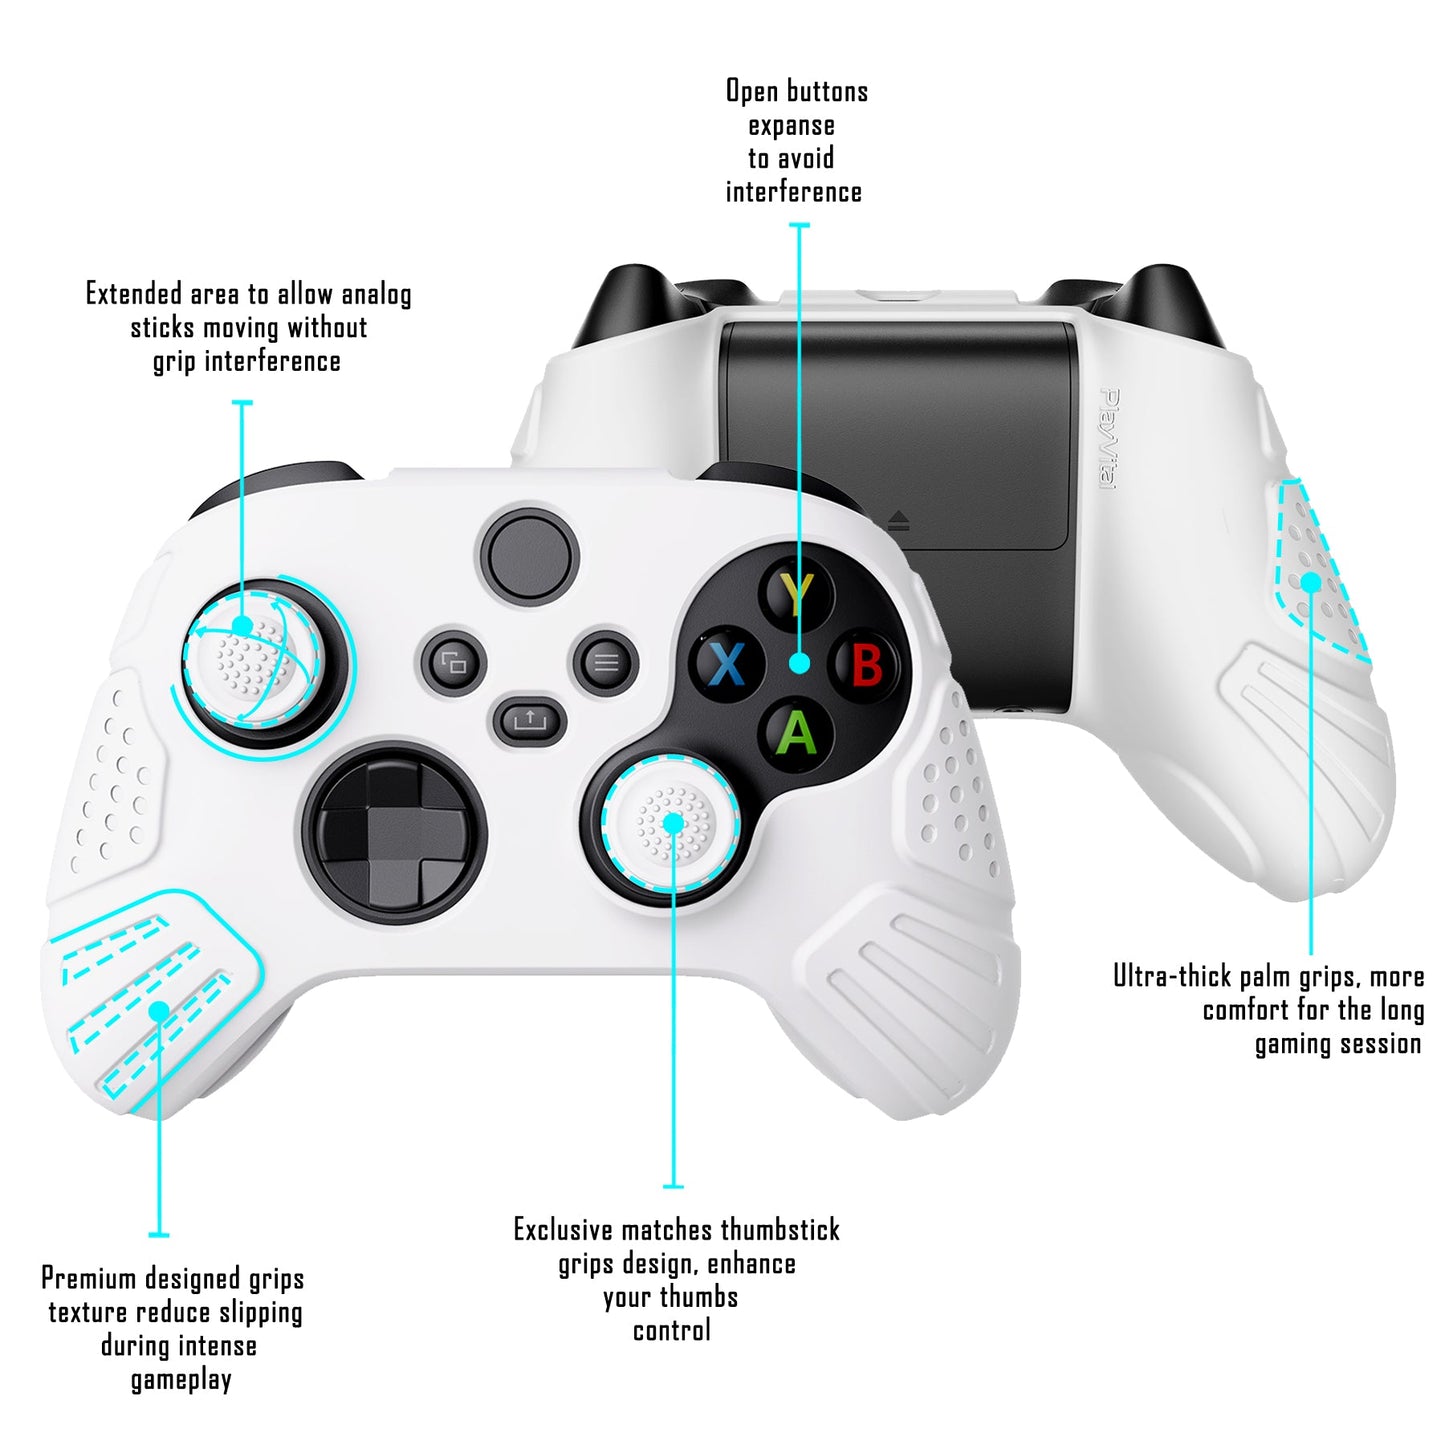 PlayVital Guardian Edition White Ergonomic Soft Anti-slip Controller Silicone Case Cover, Rubber Protector Skins with White Joystick Caps for Xbox Series S and Xbox Series X Controller - HCX3002 PlayVital